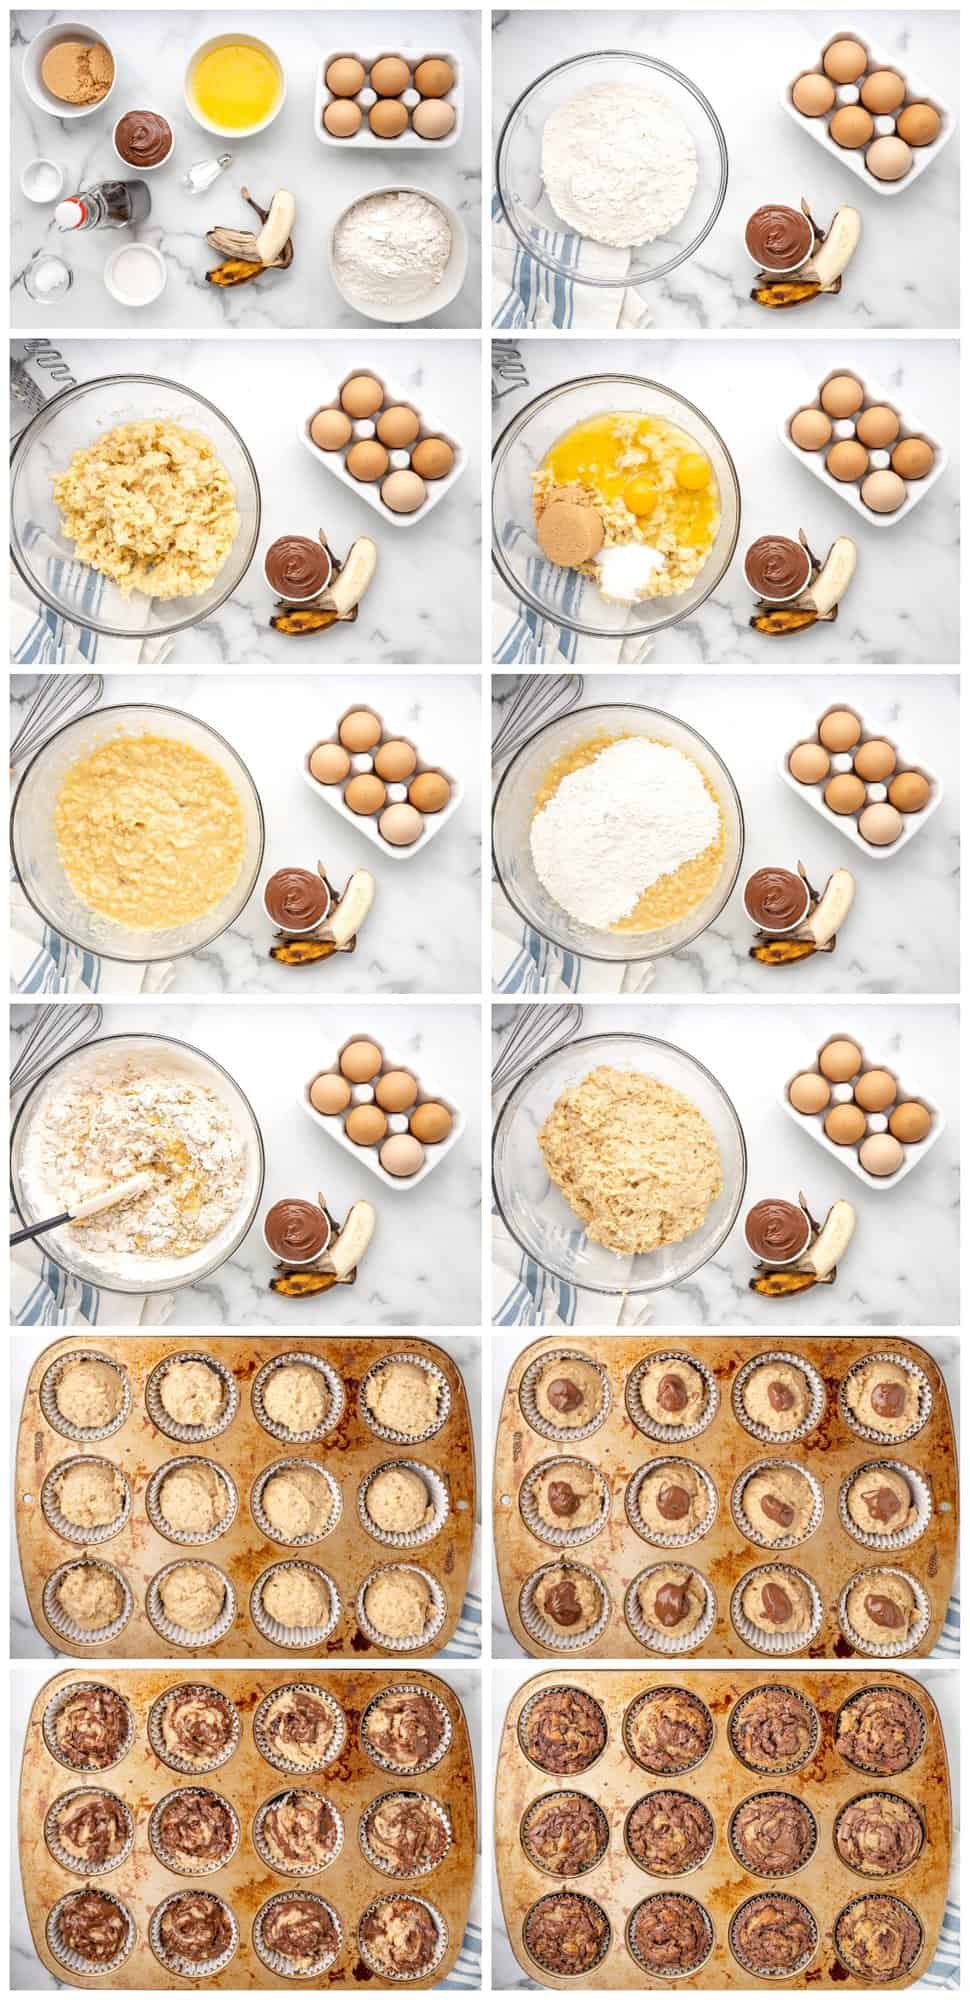 step by step photos for how to make banana nutella muffins.